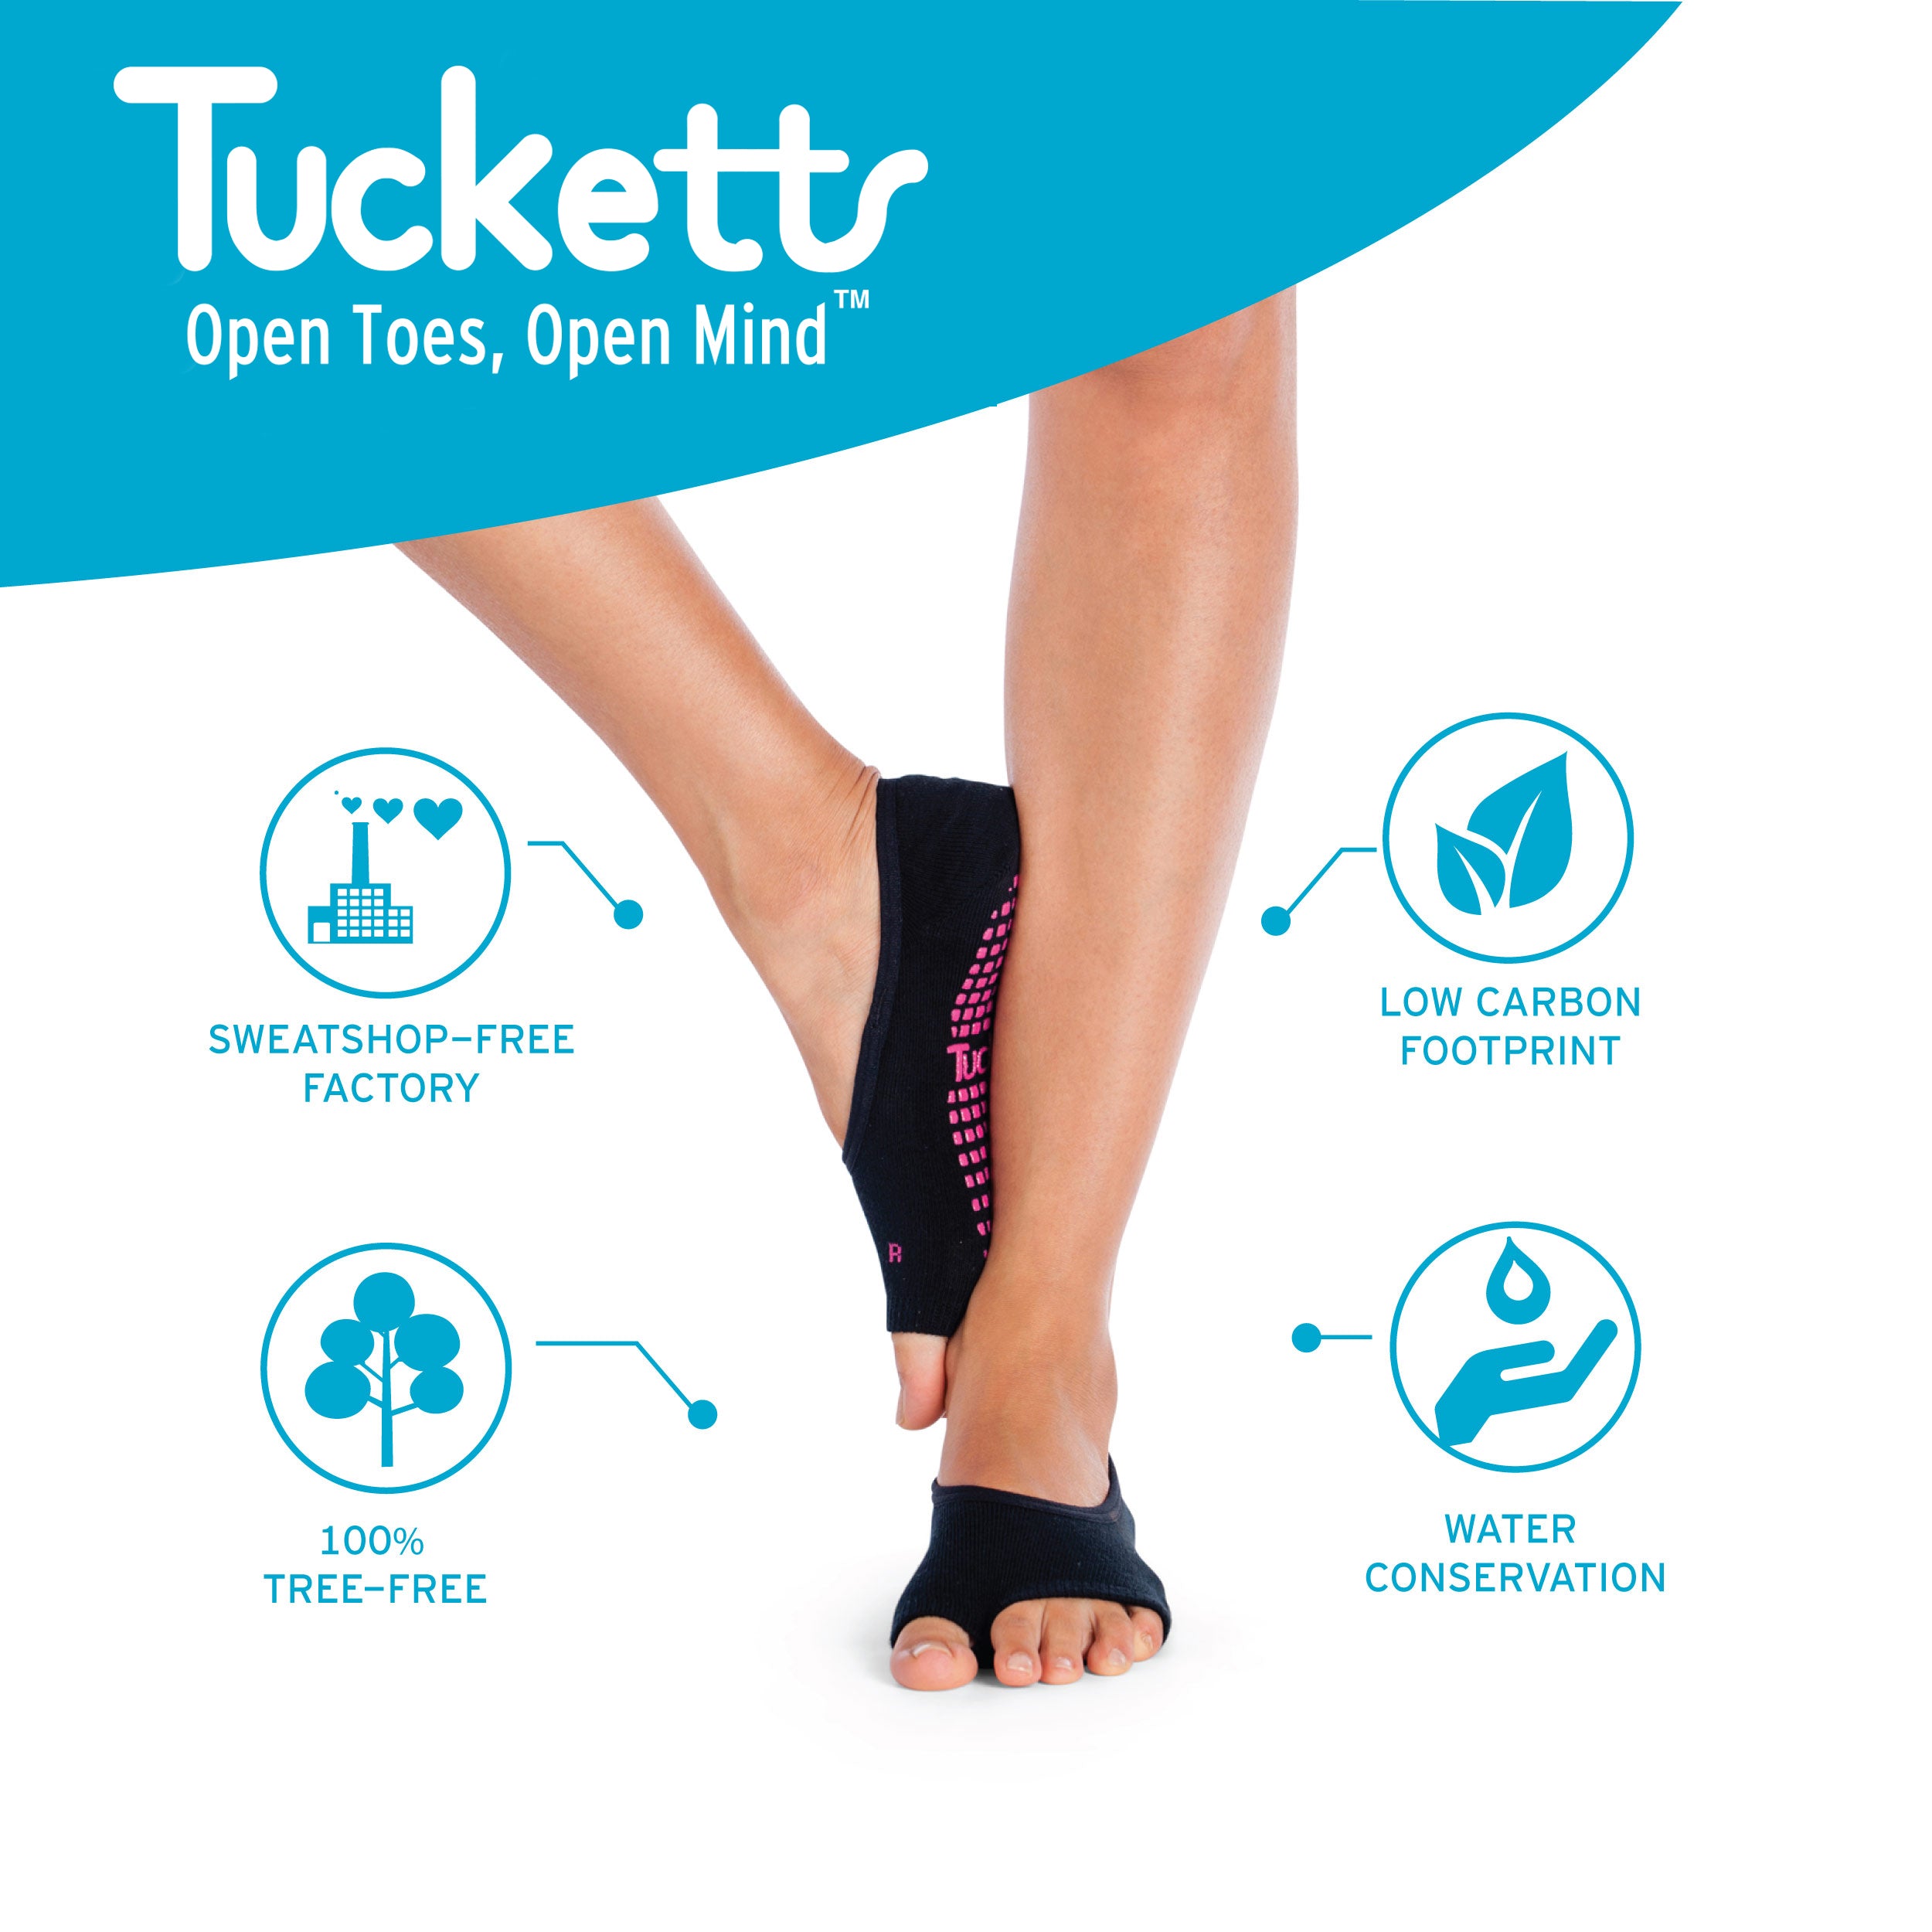  Tucketts Ballerina Toeless Non-Slip Grip Socks - Anti Skid  Barre, Pilates, Dance, Home & Leisure, Pedicure - S/M - 1 Pair Solid Night  : Tucketts: Clothing, Shoes & Jewelry